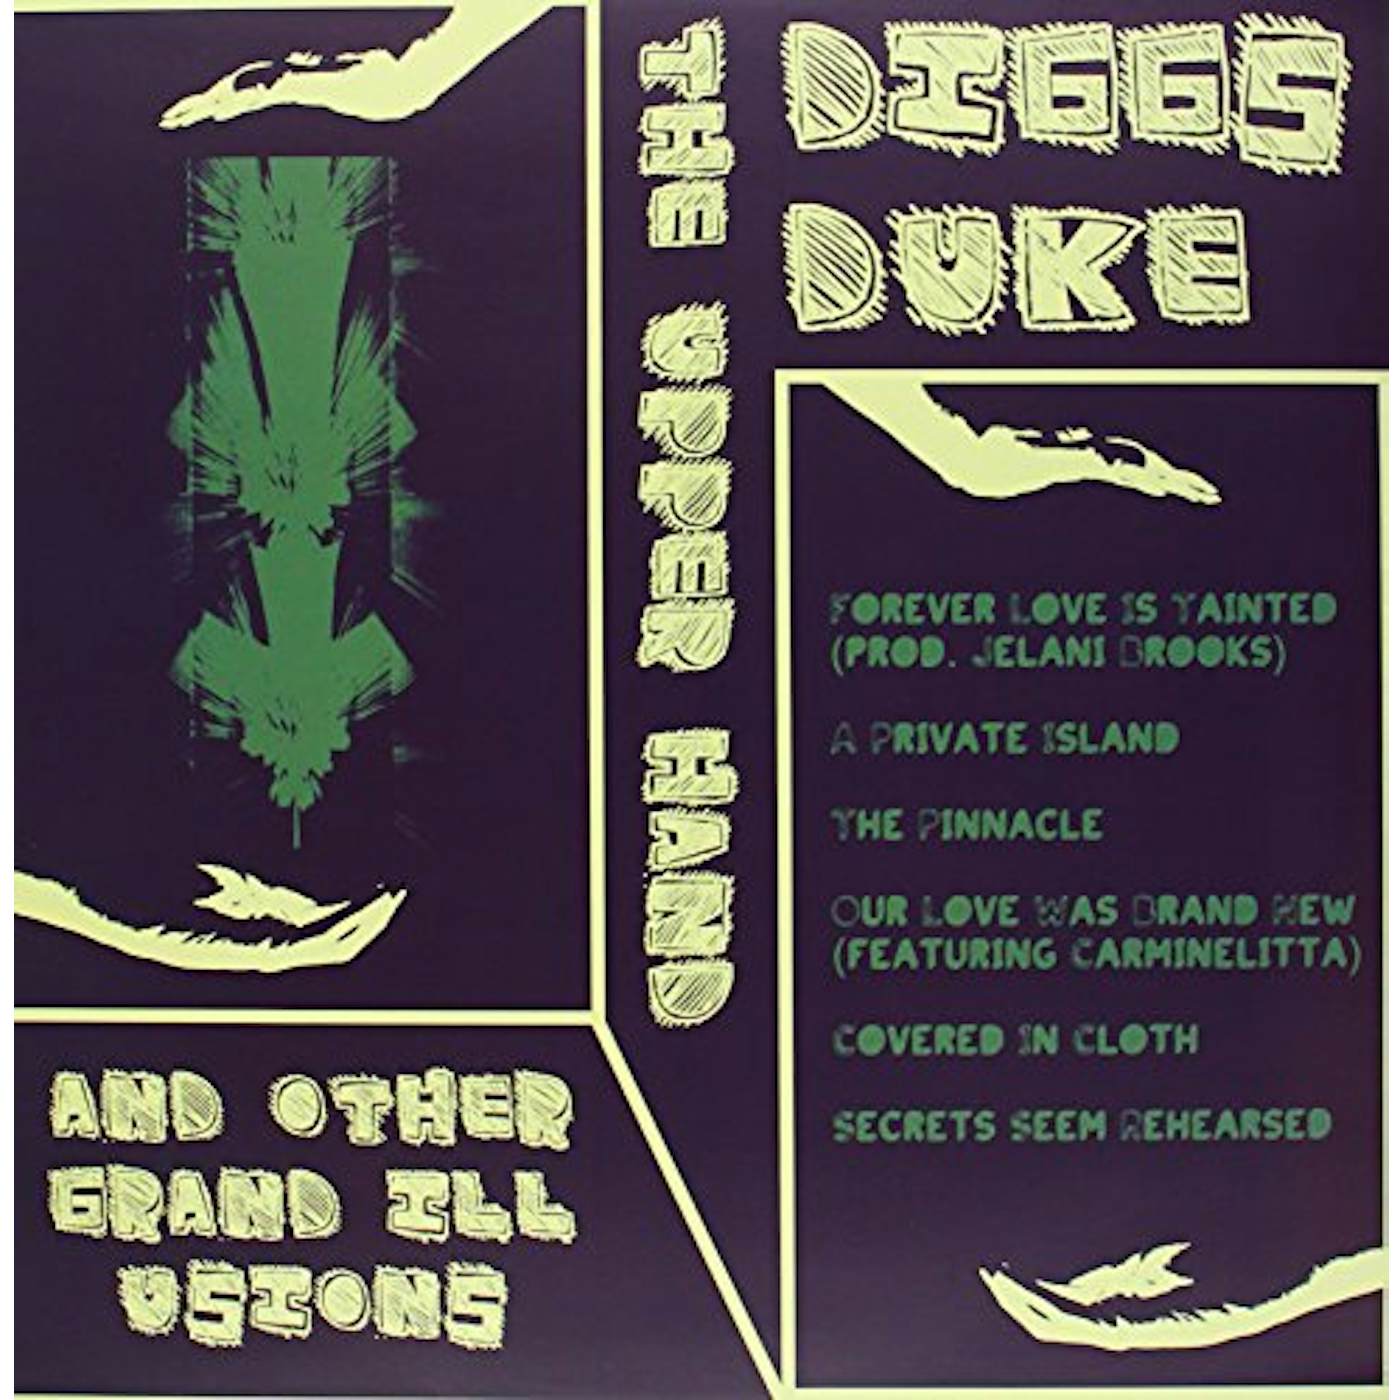 Diggs Duke UPPER HAND & OTHER GRAND ILLUSIONS Vinyl Record